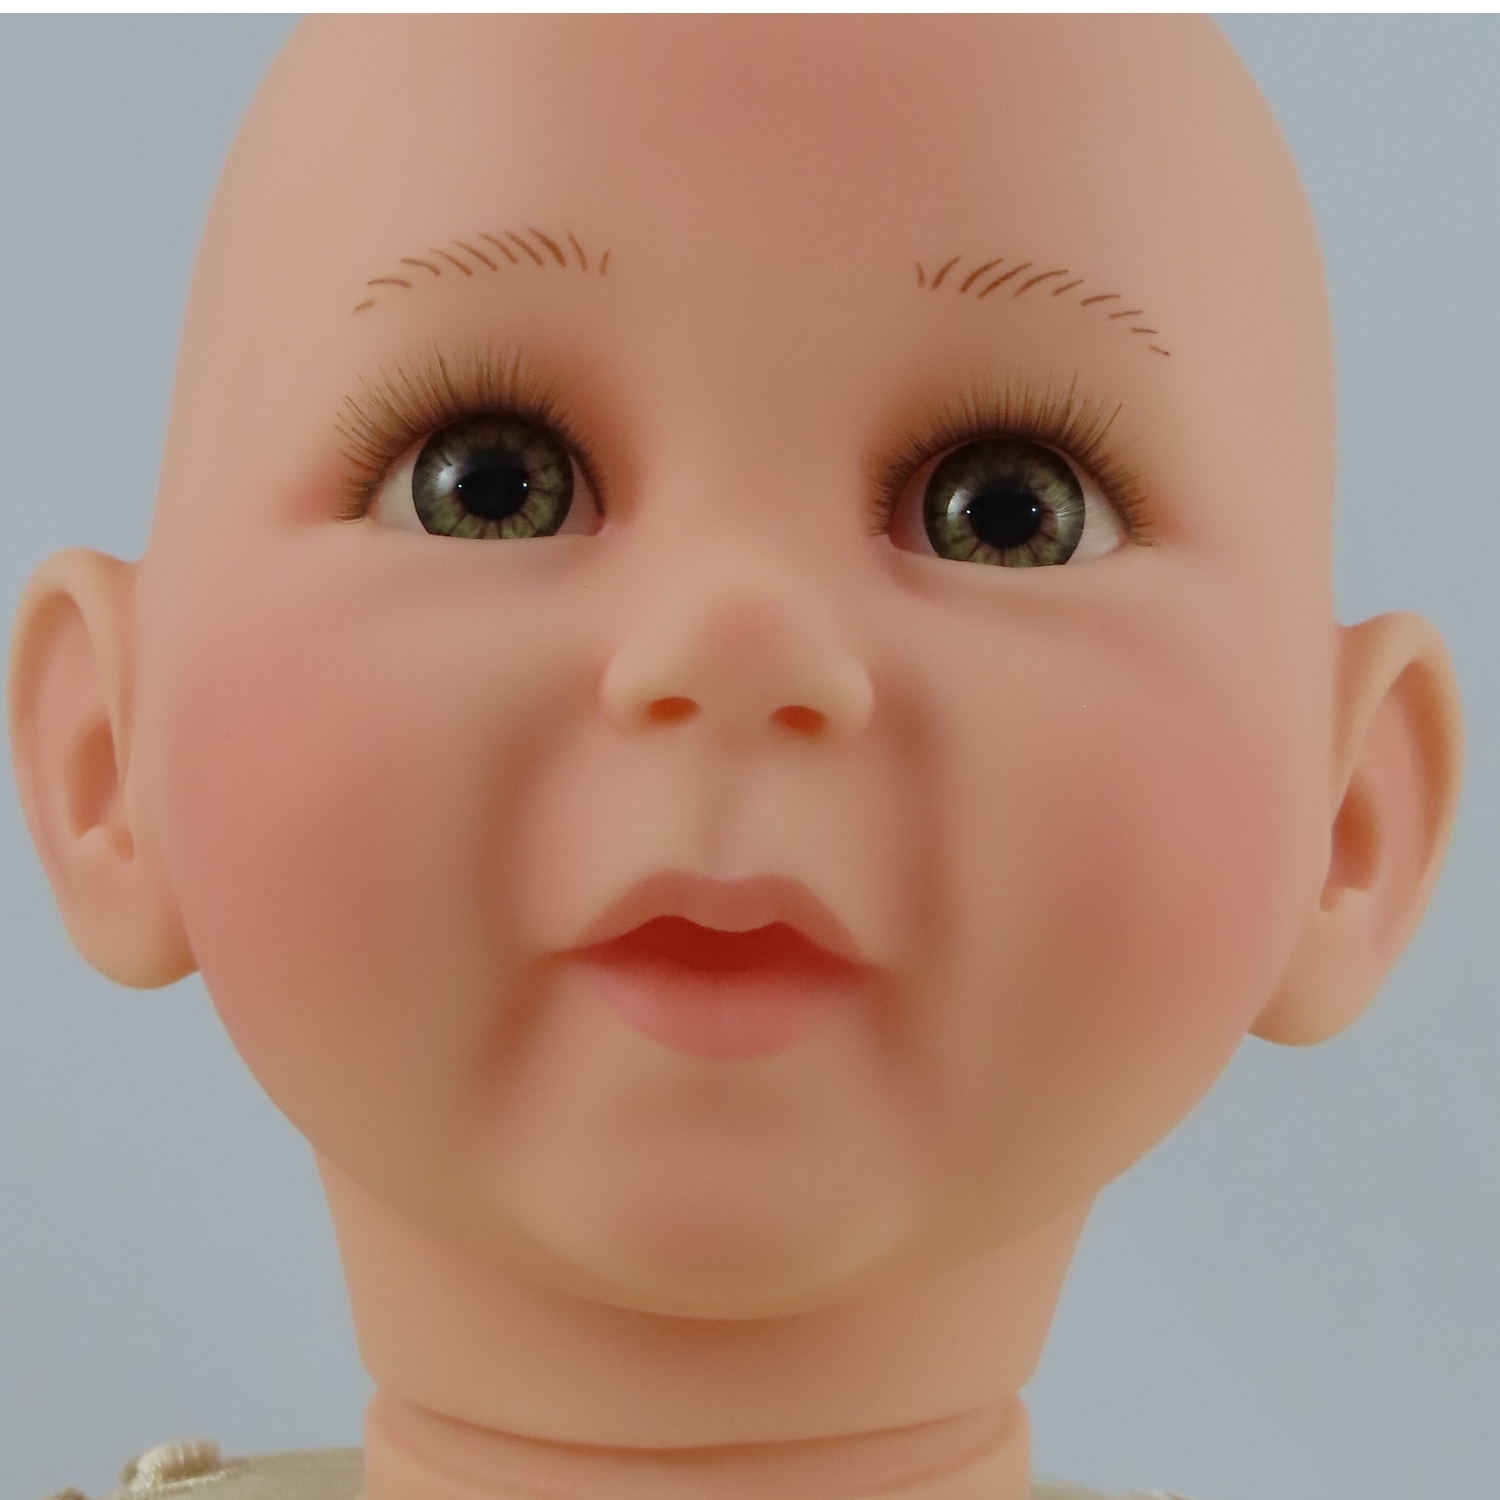 Jordan Doll Kit for Creating Toddler and Baby Dolls That Look Real